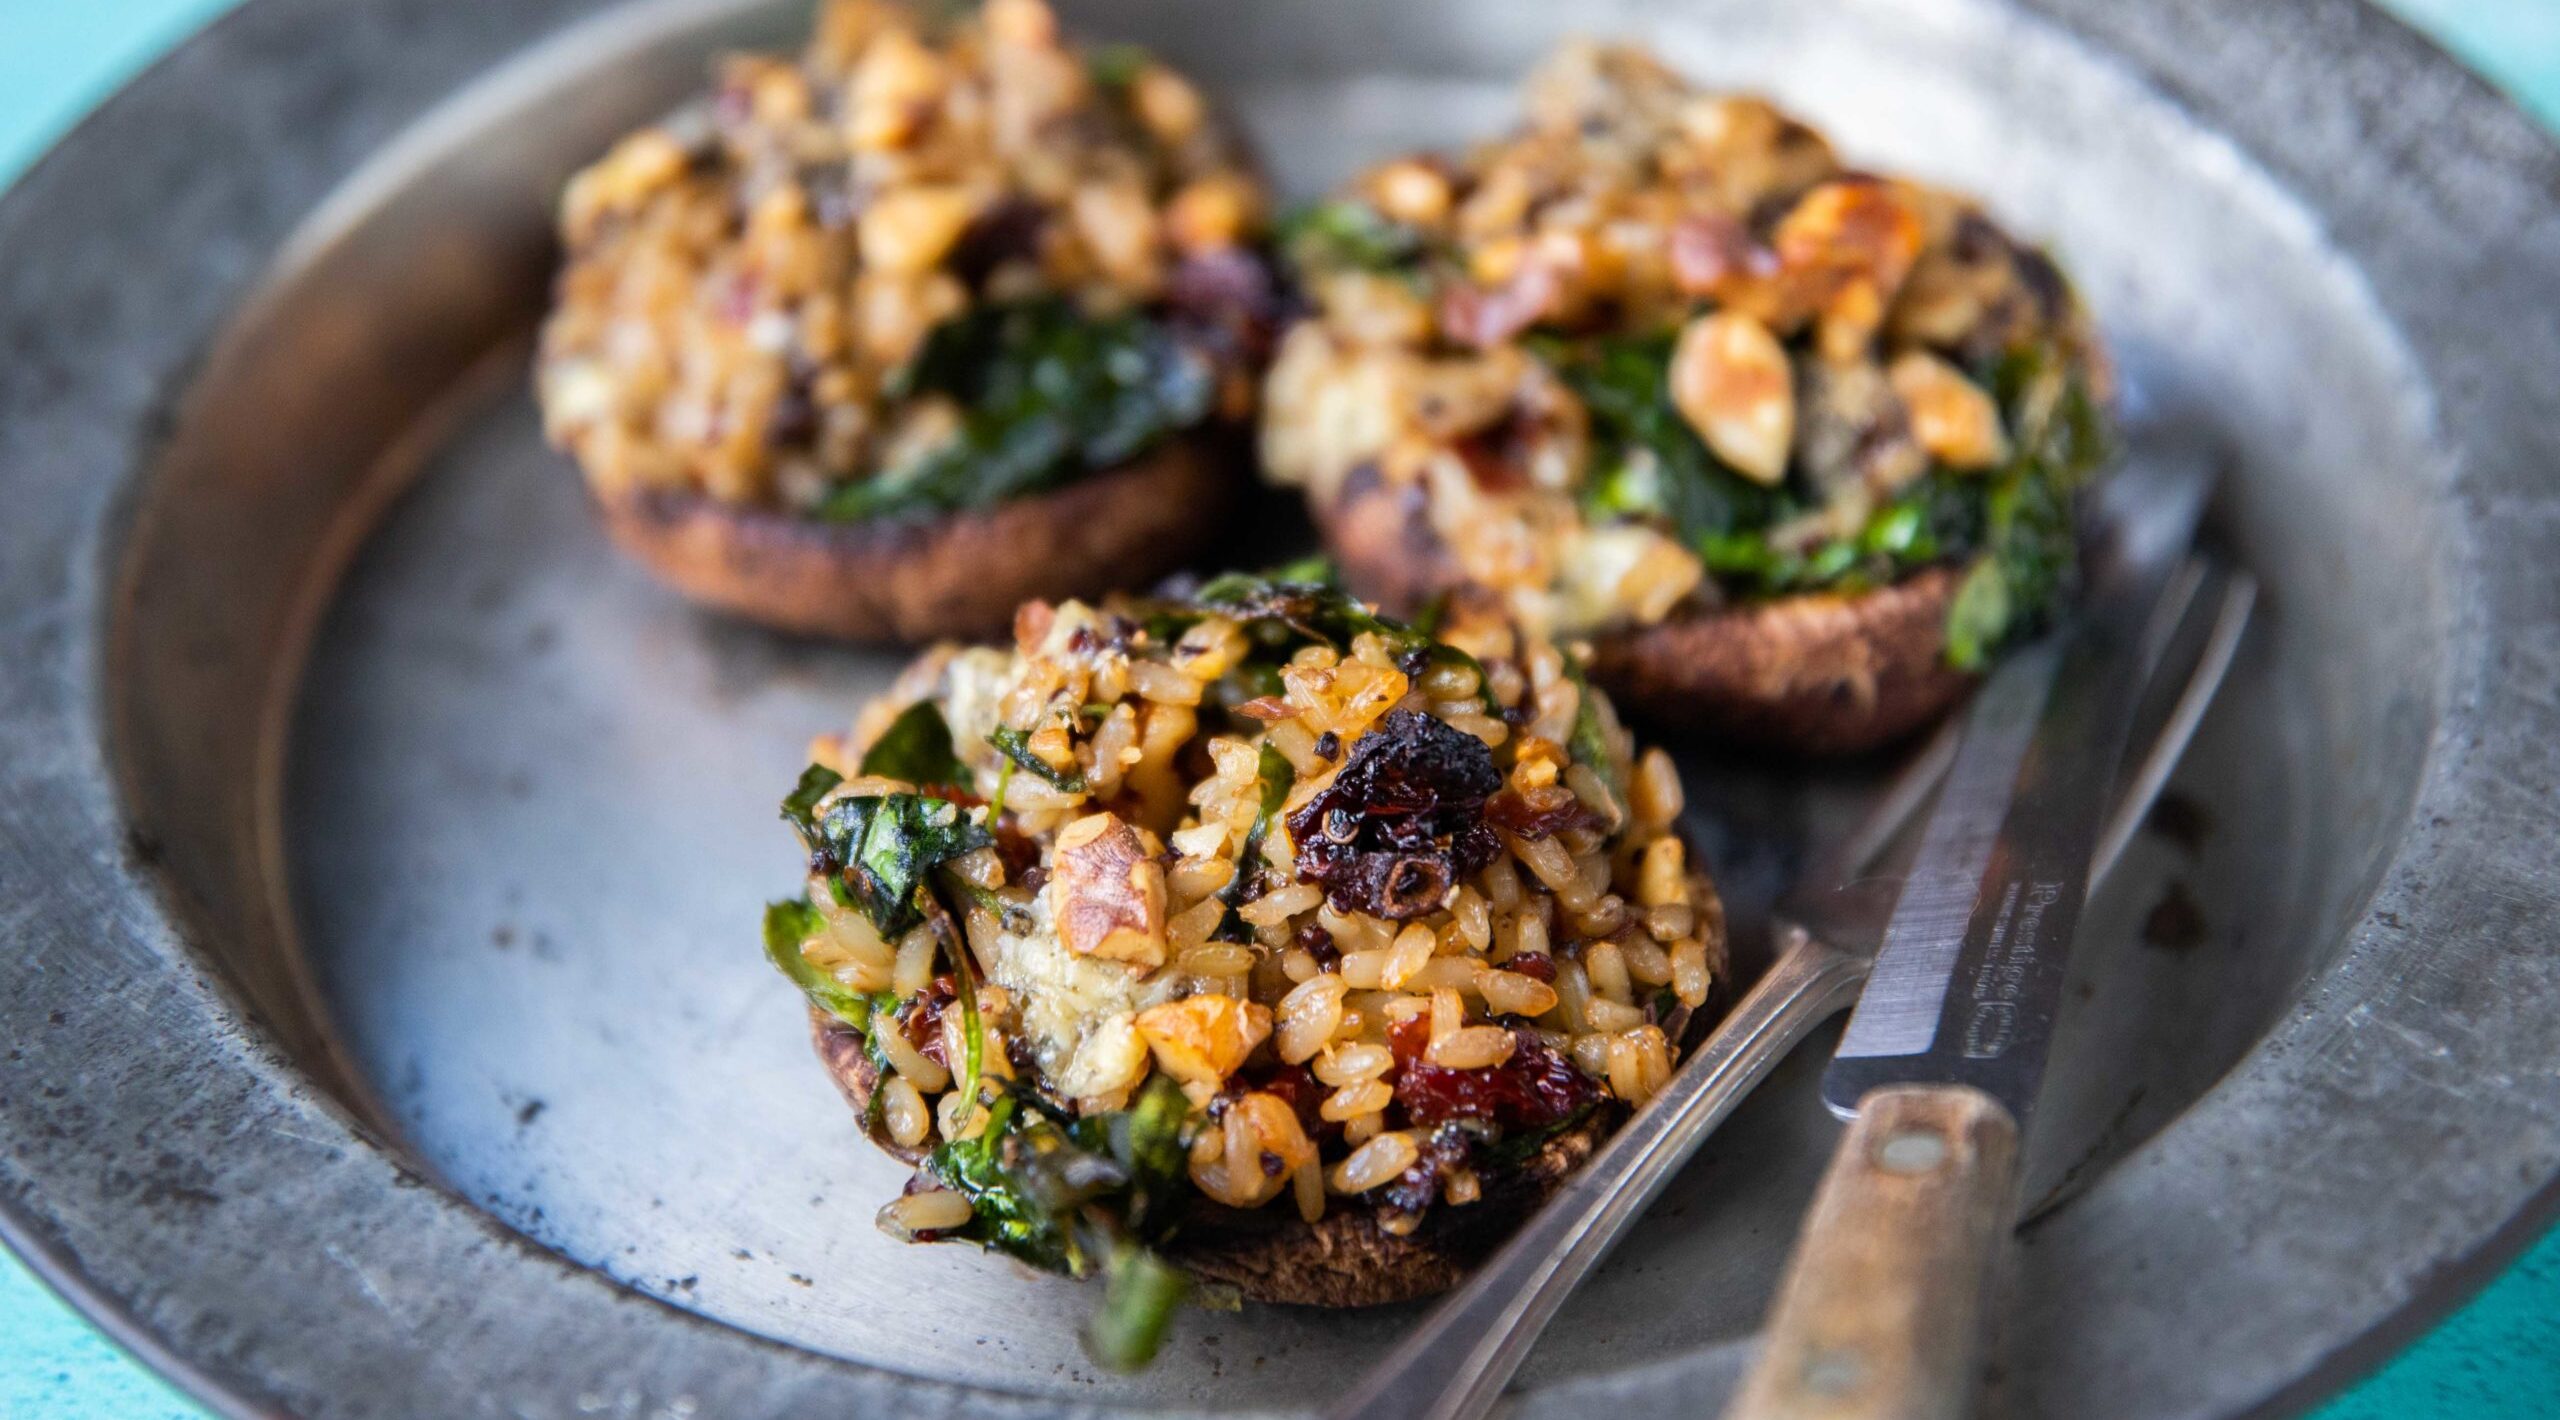 3 large mushrooms stuffed with rice,greens and nuts on a metal plate with knife and fork.